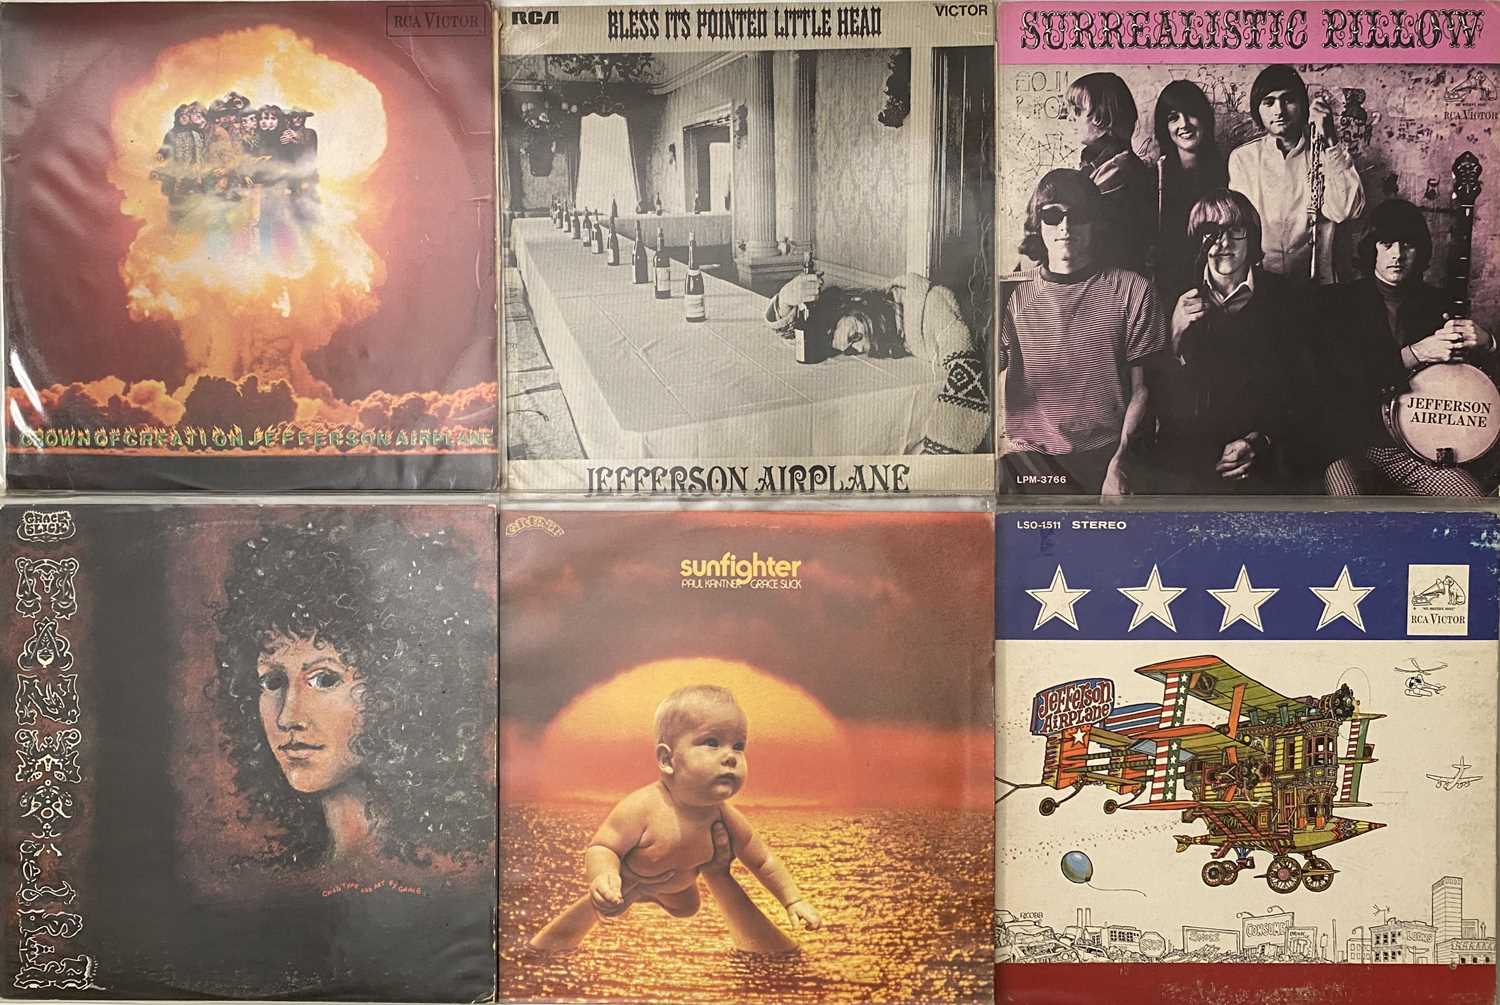 JEFFERSON AIRPLANE / RELATED - LP PACK